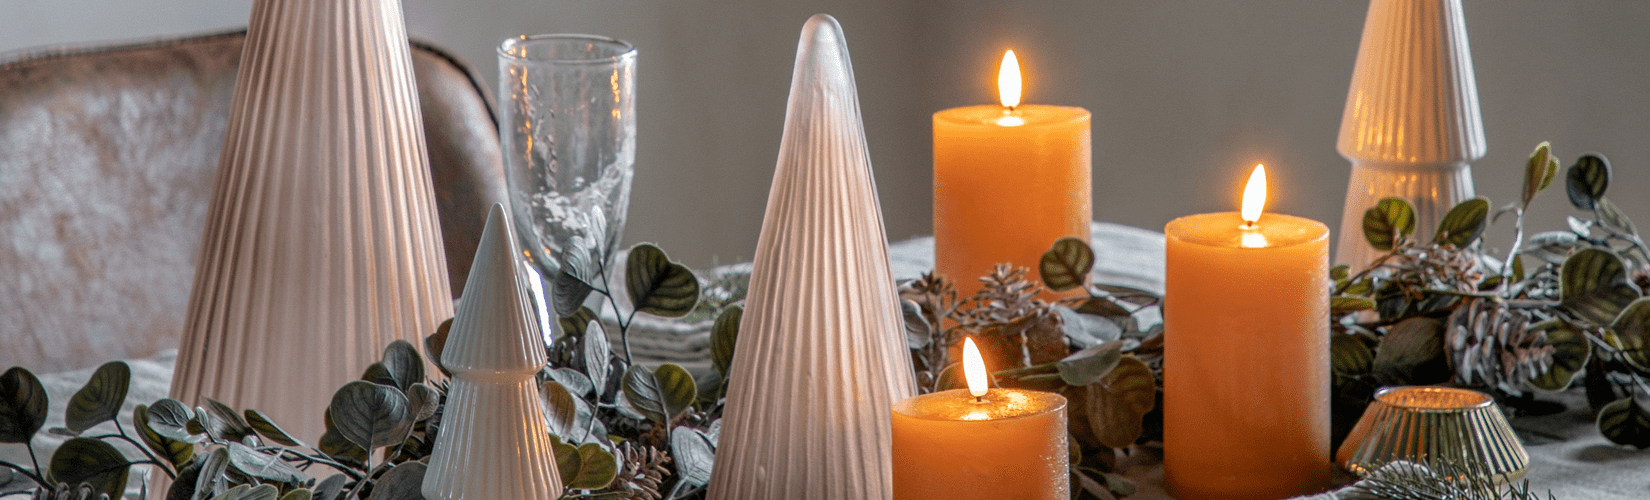 4 Timeless Christmas Decoration Ideas That Look Good Year After Year